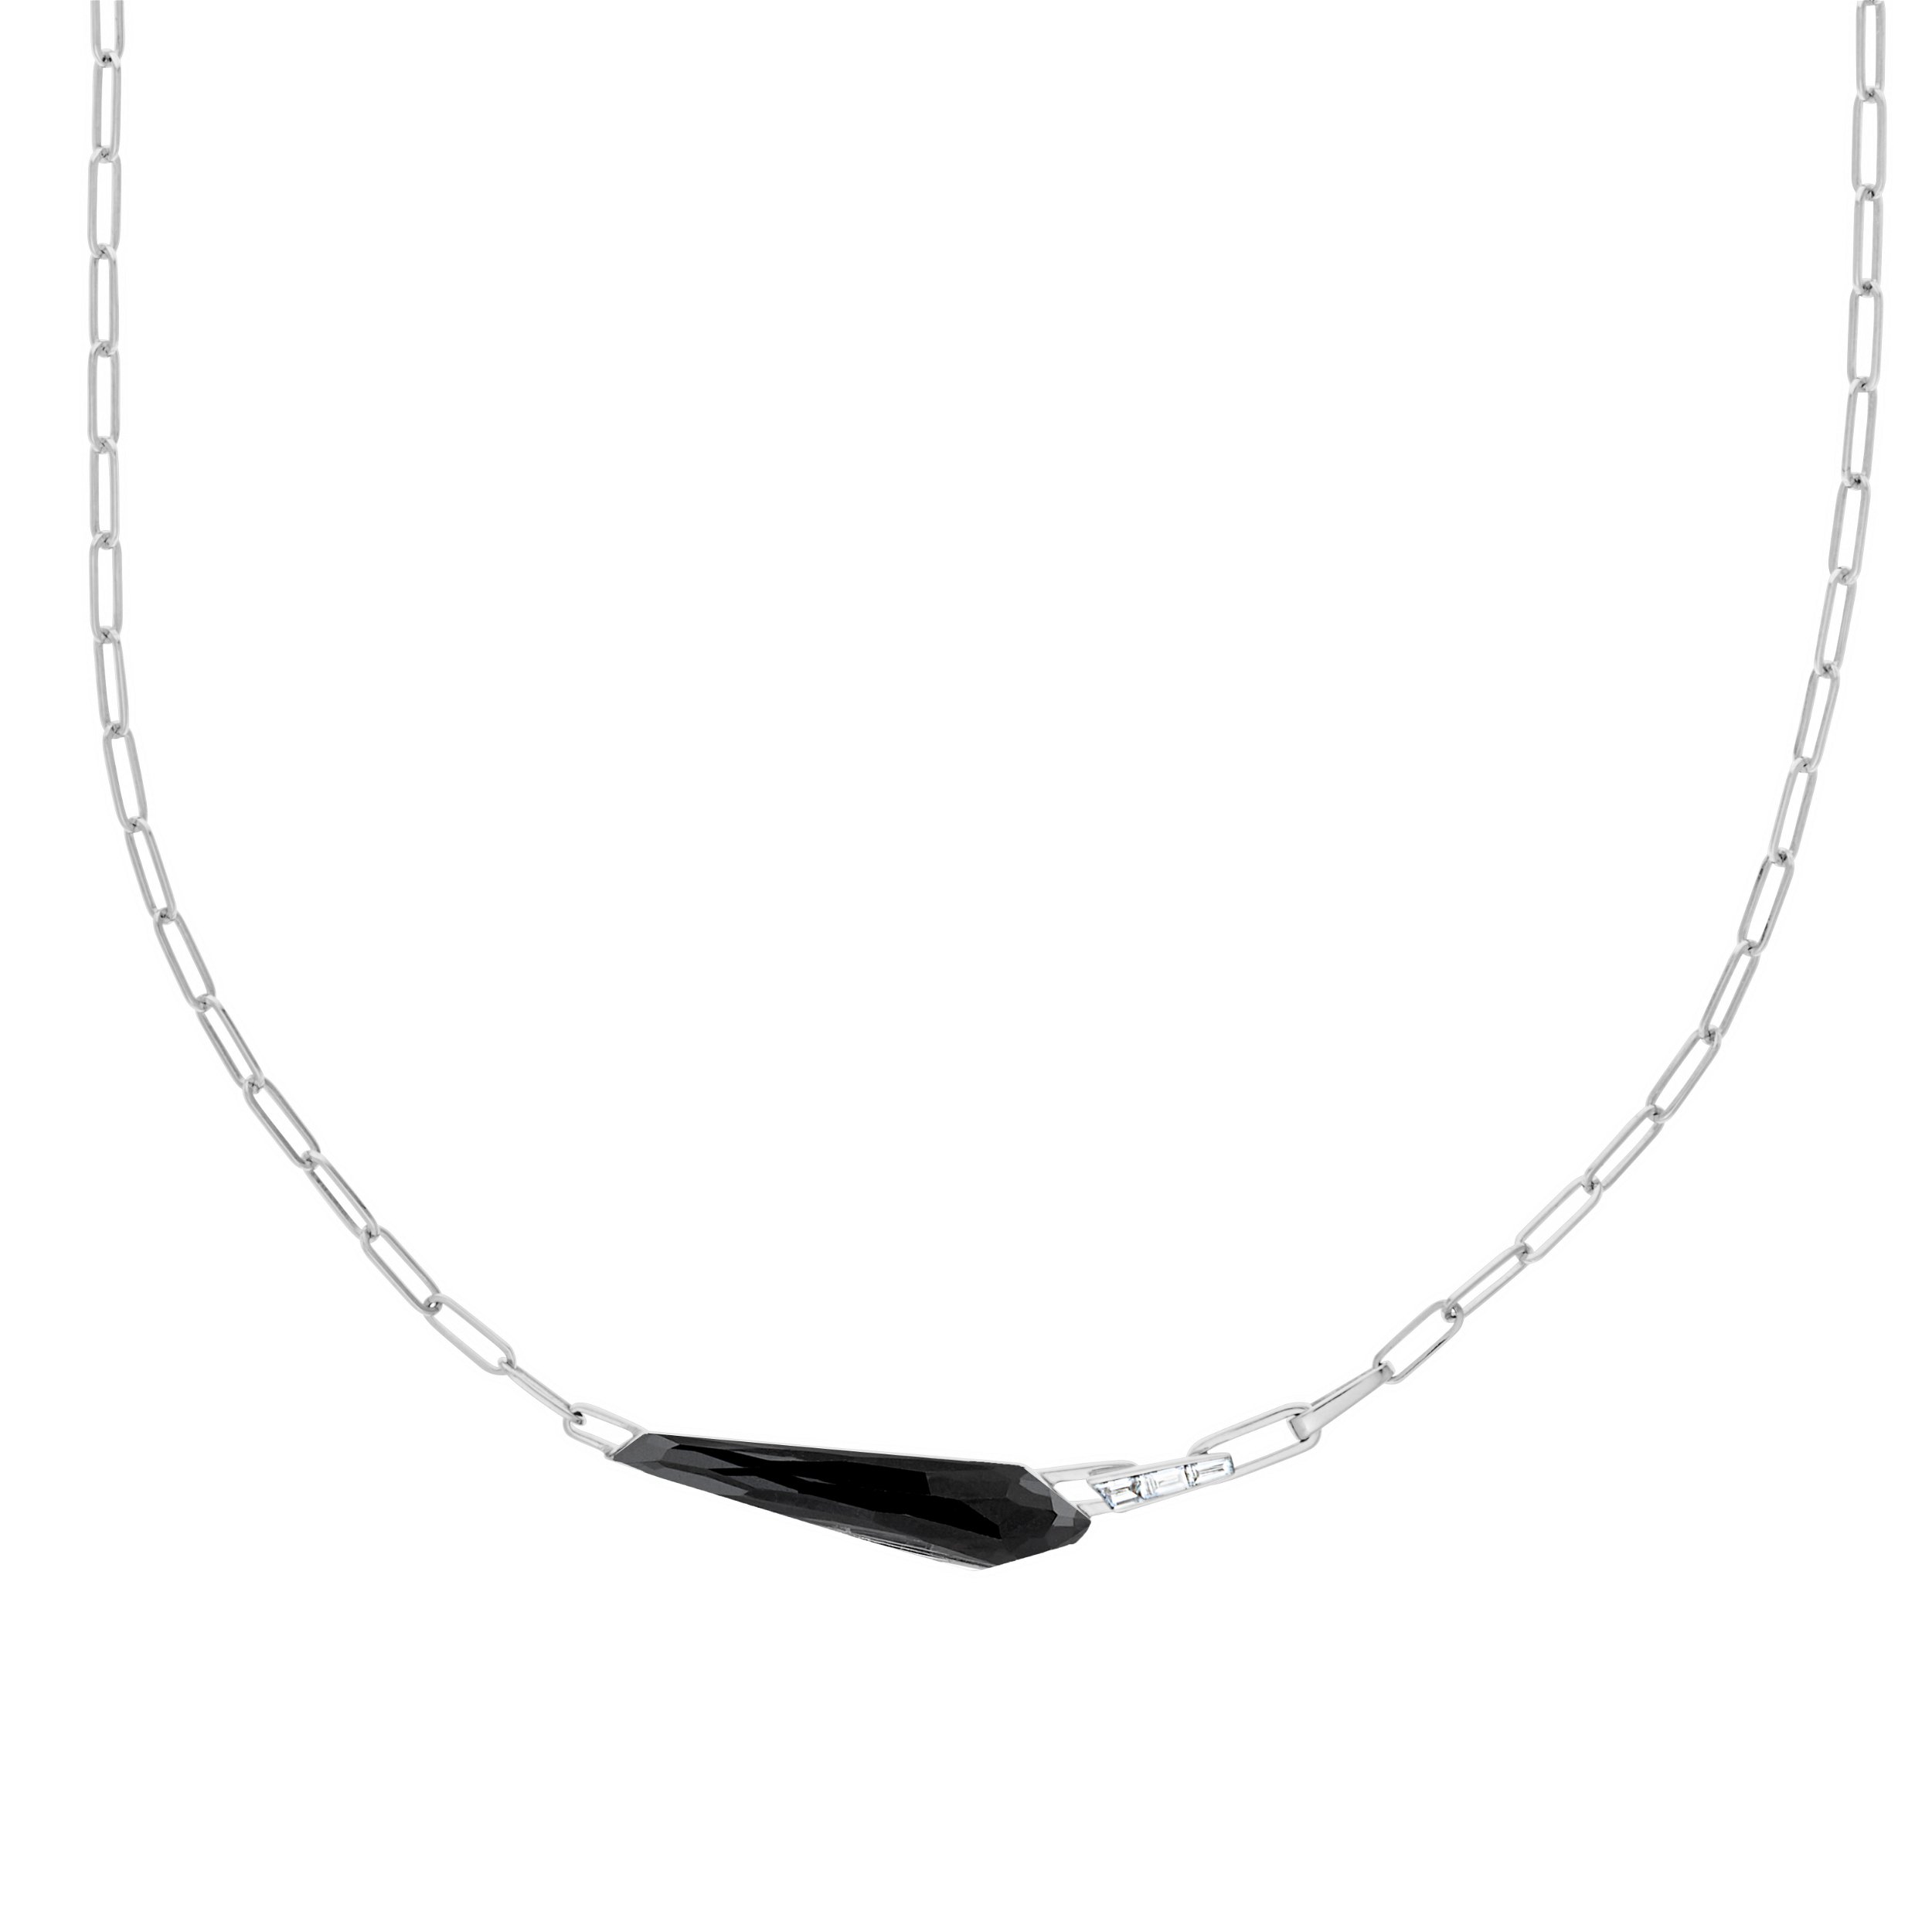 CH2 Shard Slimline Linked Choker Necklace with Falcons Eye in 18kt White Gold - 16.5"